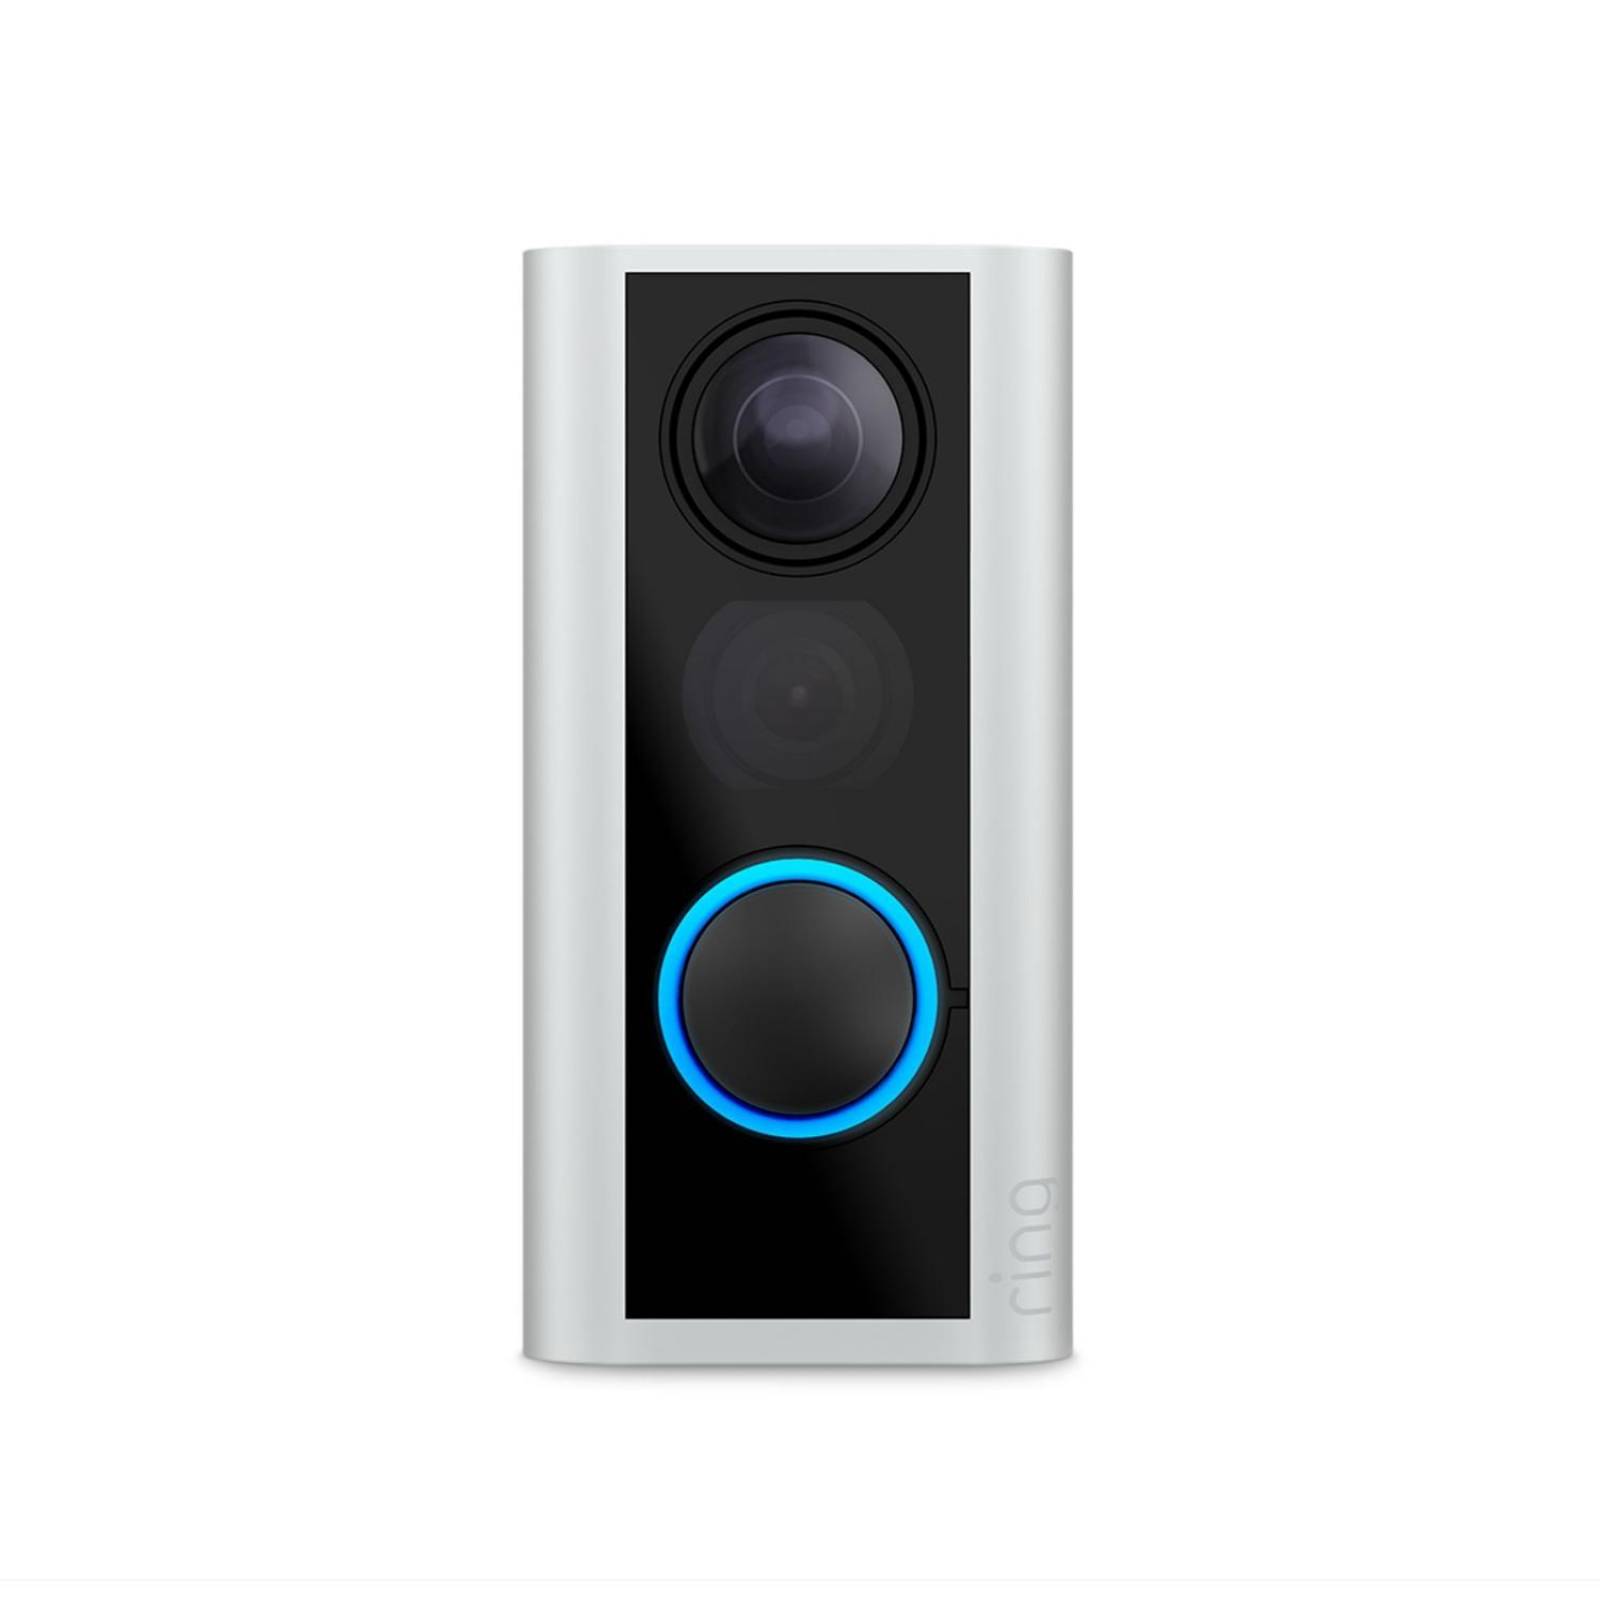 Ring Video Timbre Inteligente Door View Cam Wi-Fi 